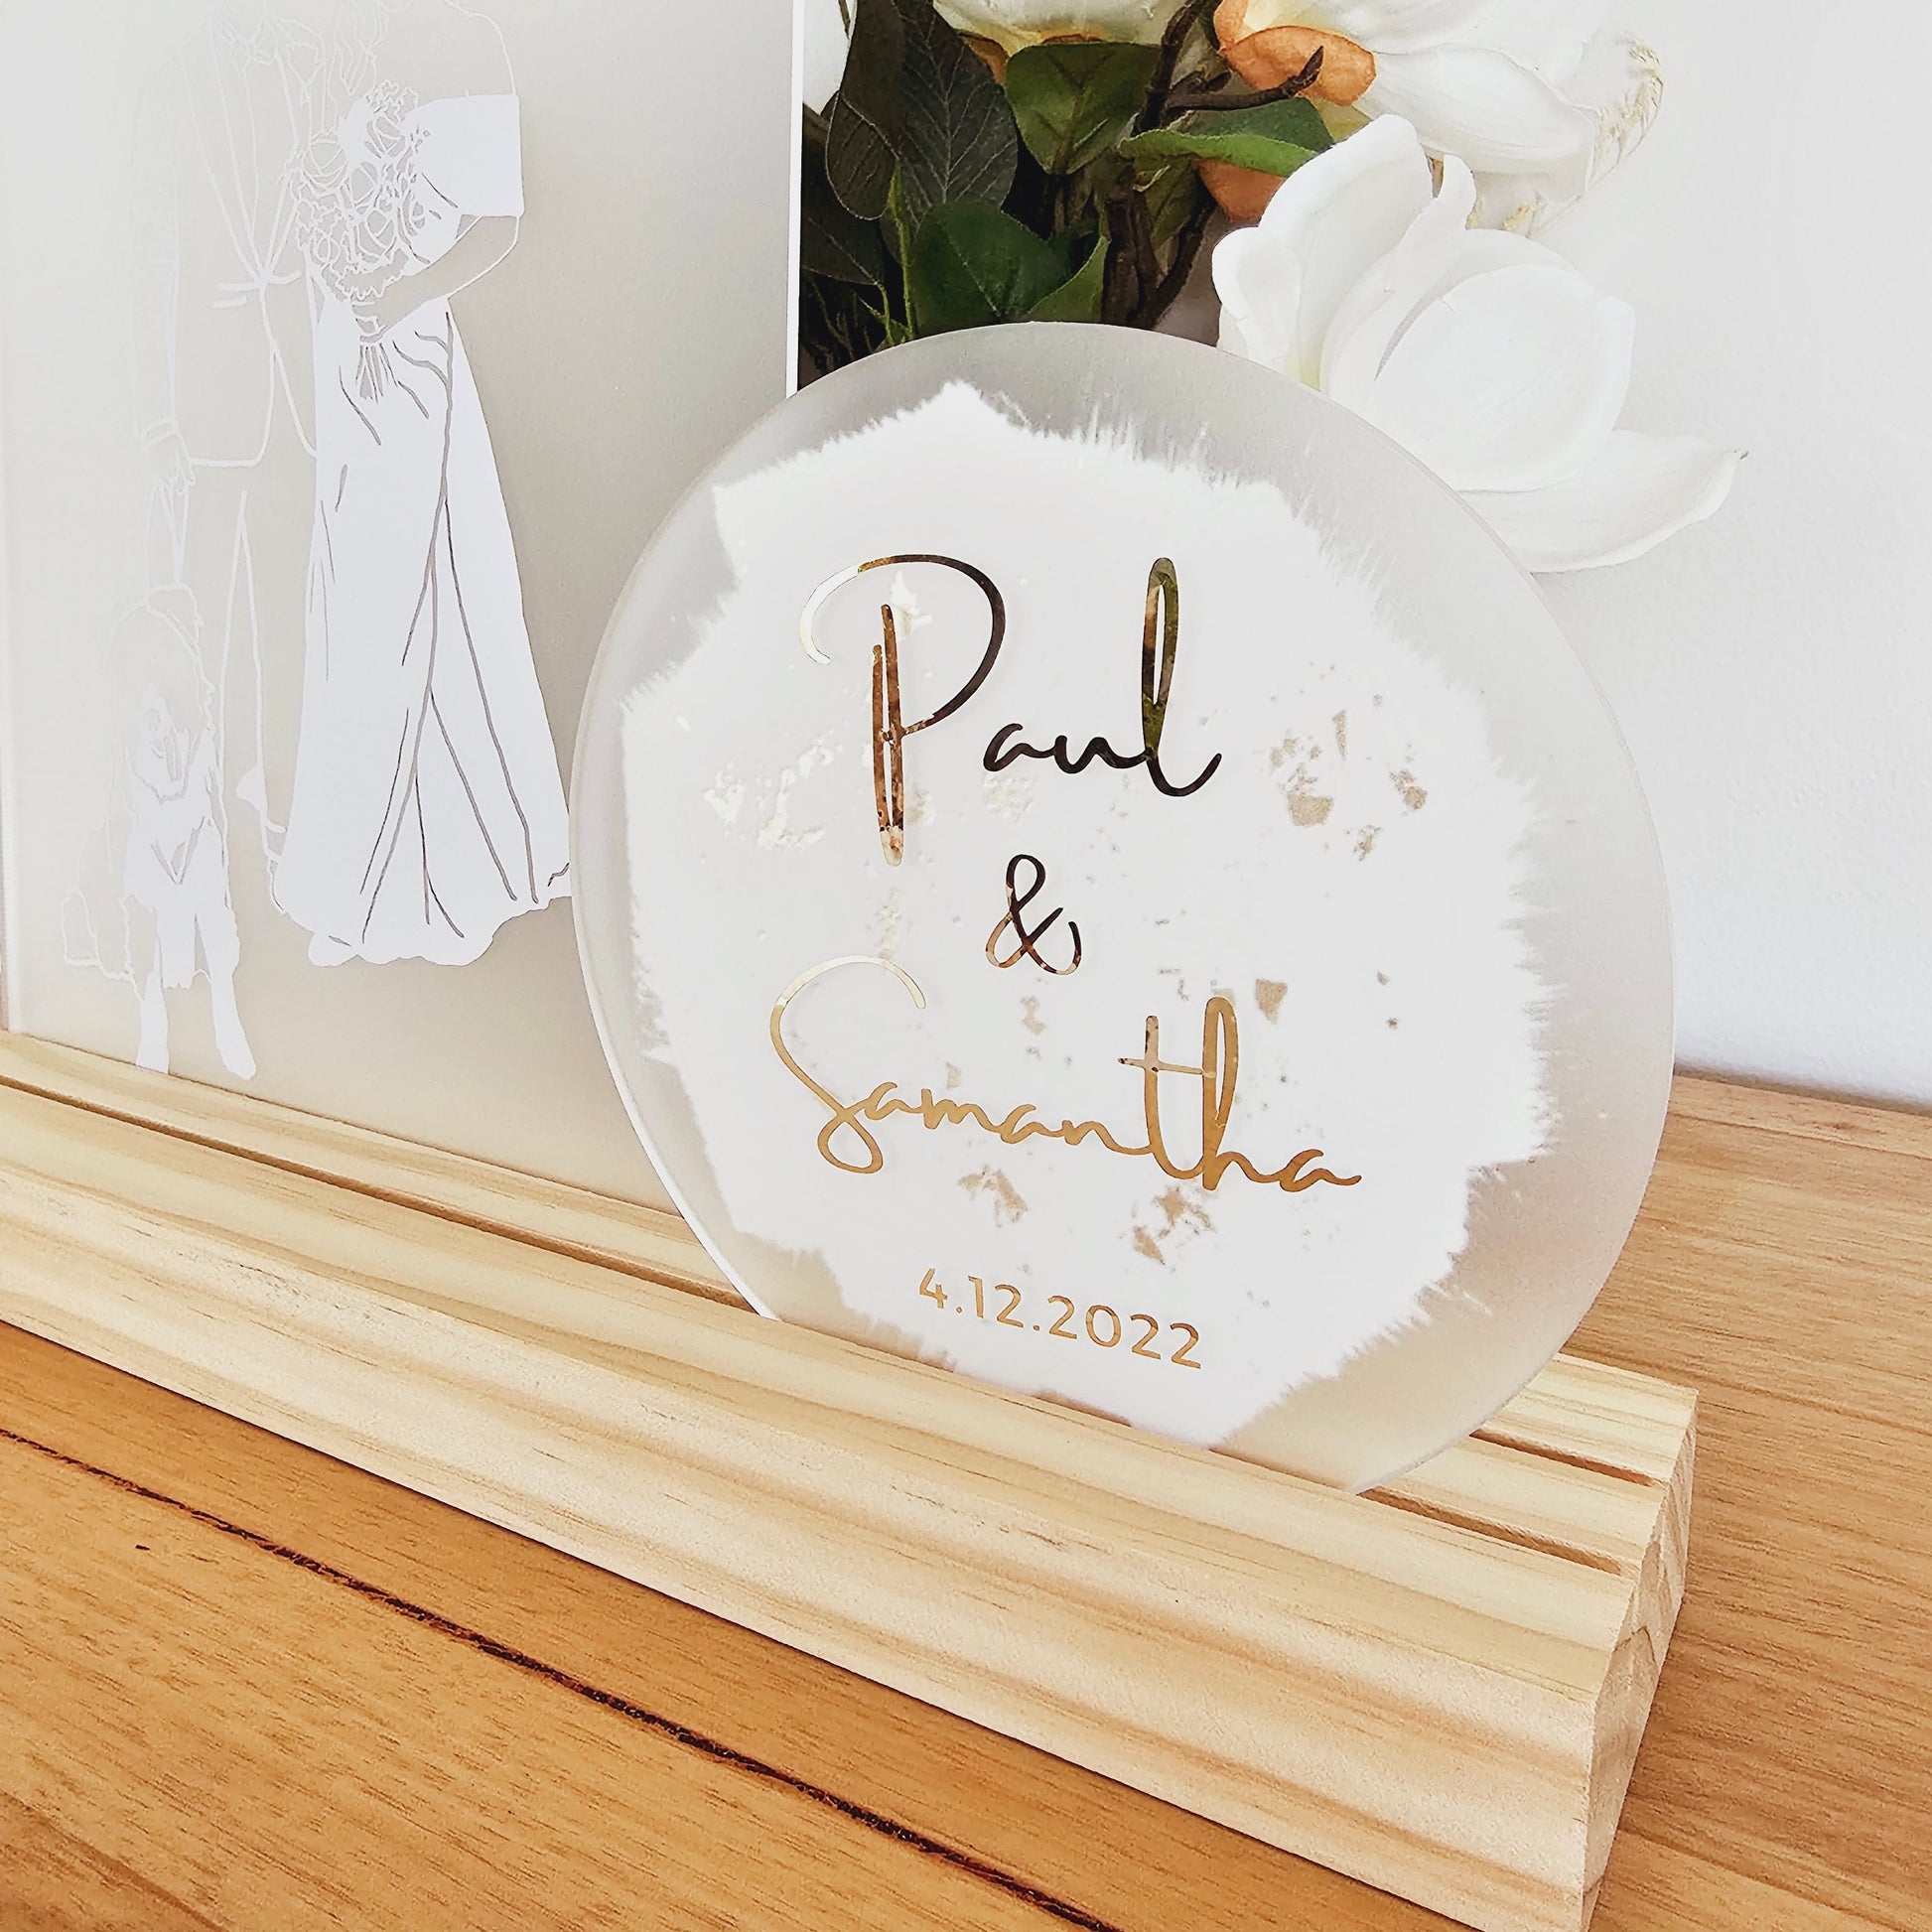 The illustration is in white vinyl and shows a dog, a groom and a bride in a white wedding dress. The arch is sitting in a pine timber base. There is a circle acrylic shape next to it that says "Paul and Samantha" and the date 4.12.2022.